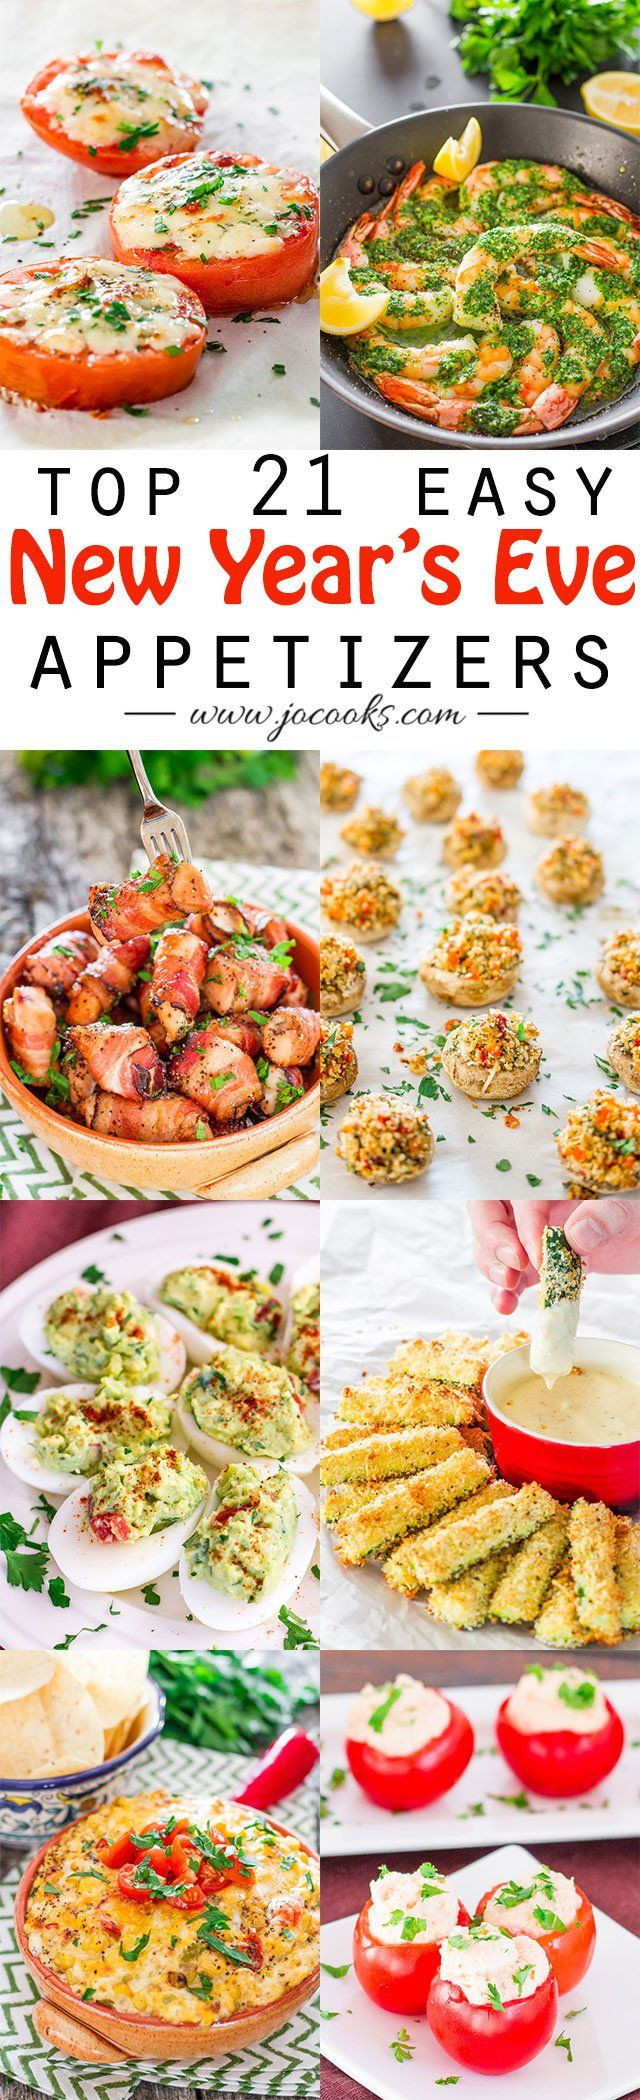 Easy Christmas Eve Appetizers
 25 best ideas about New year s eve appetizers on